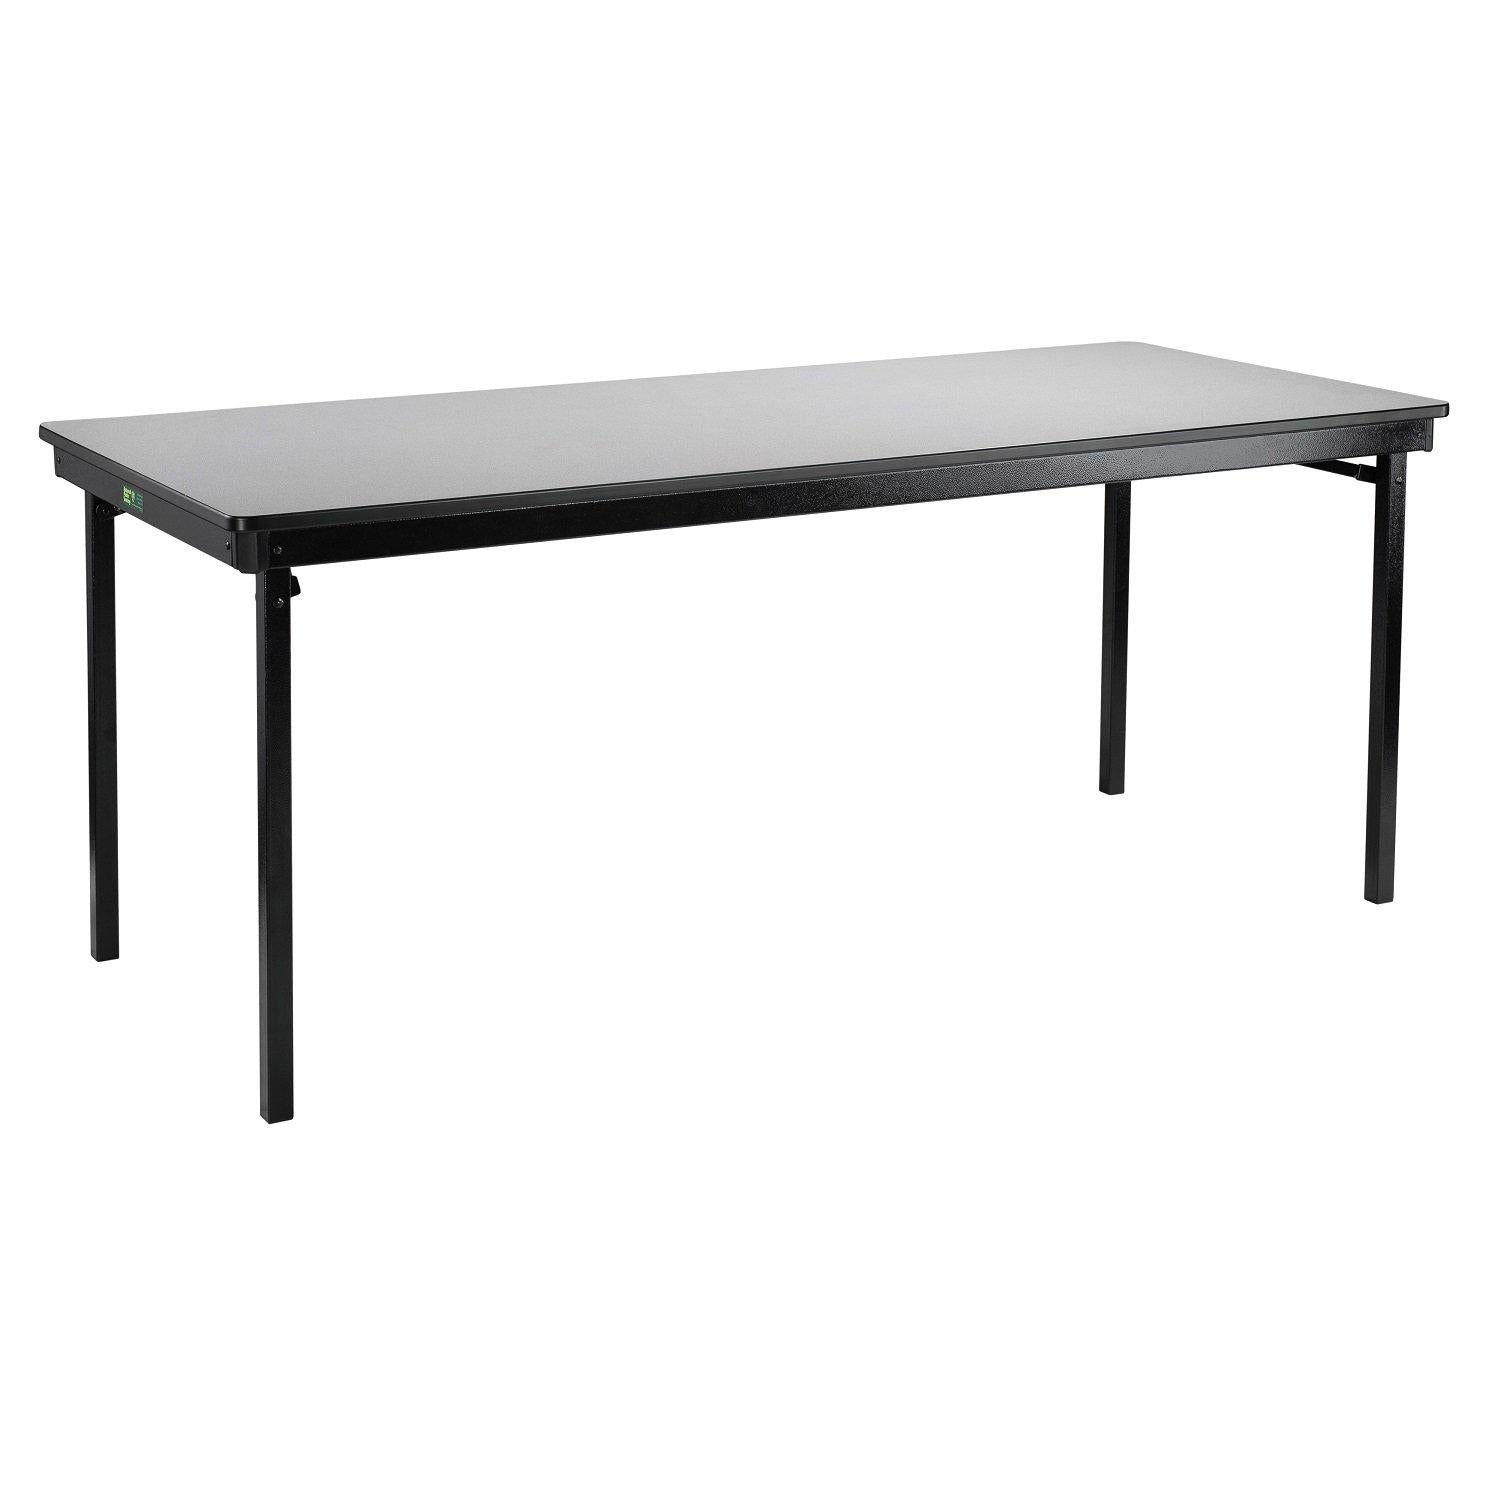 Max Seating Folding Table, 24" x 72", Premium Plywood Core, High Pressure Laminate Top with PVC Edge Banding